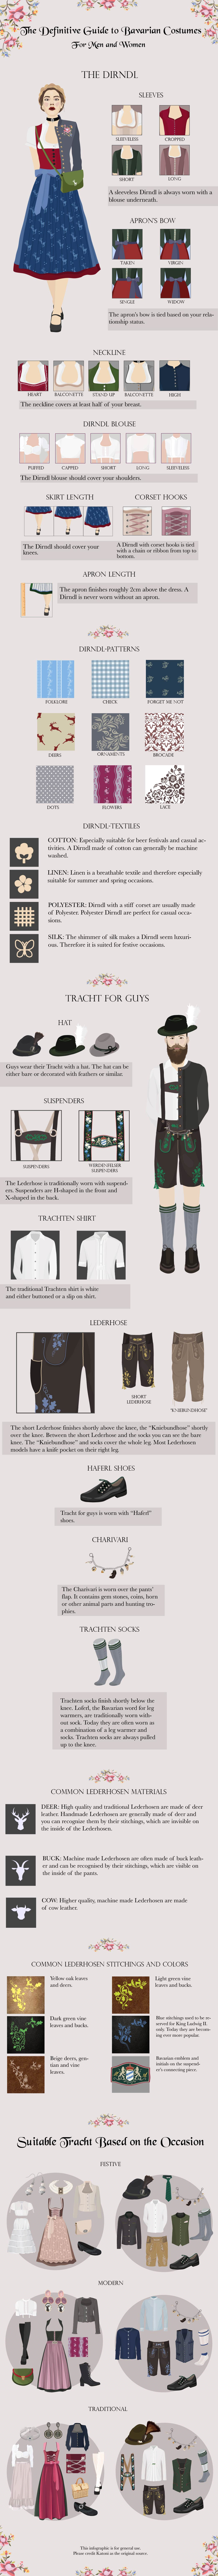 german-tradfitional-clothing-eng-infographic-plaza